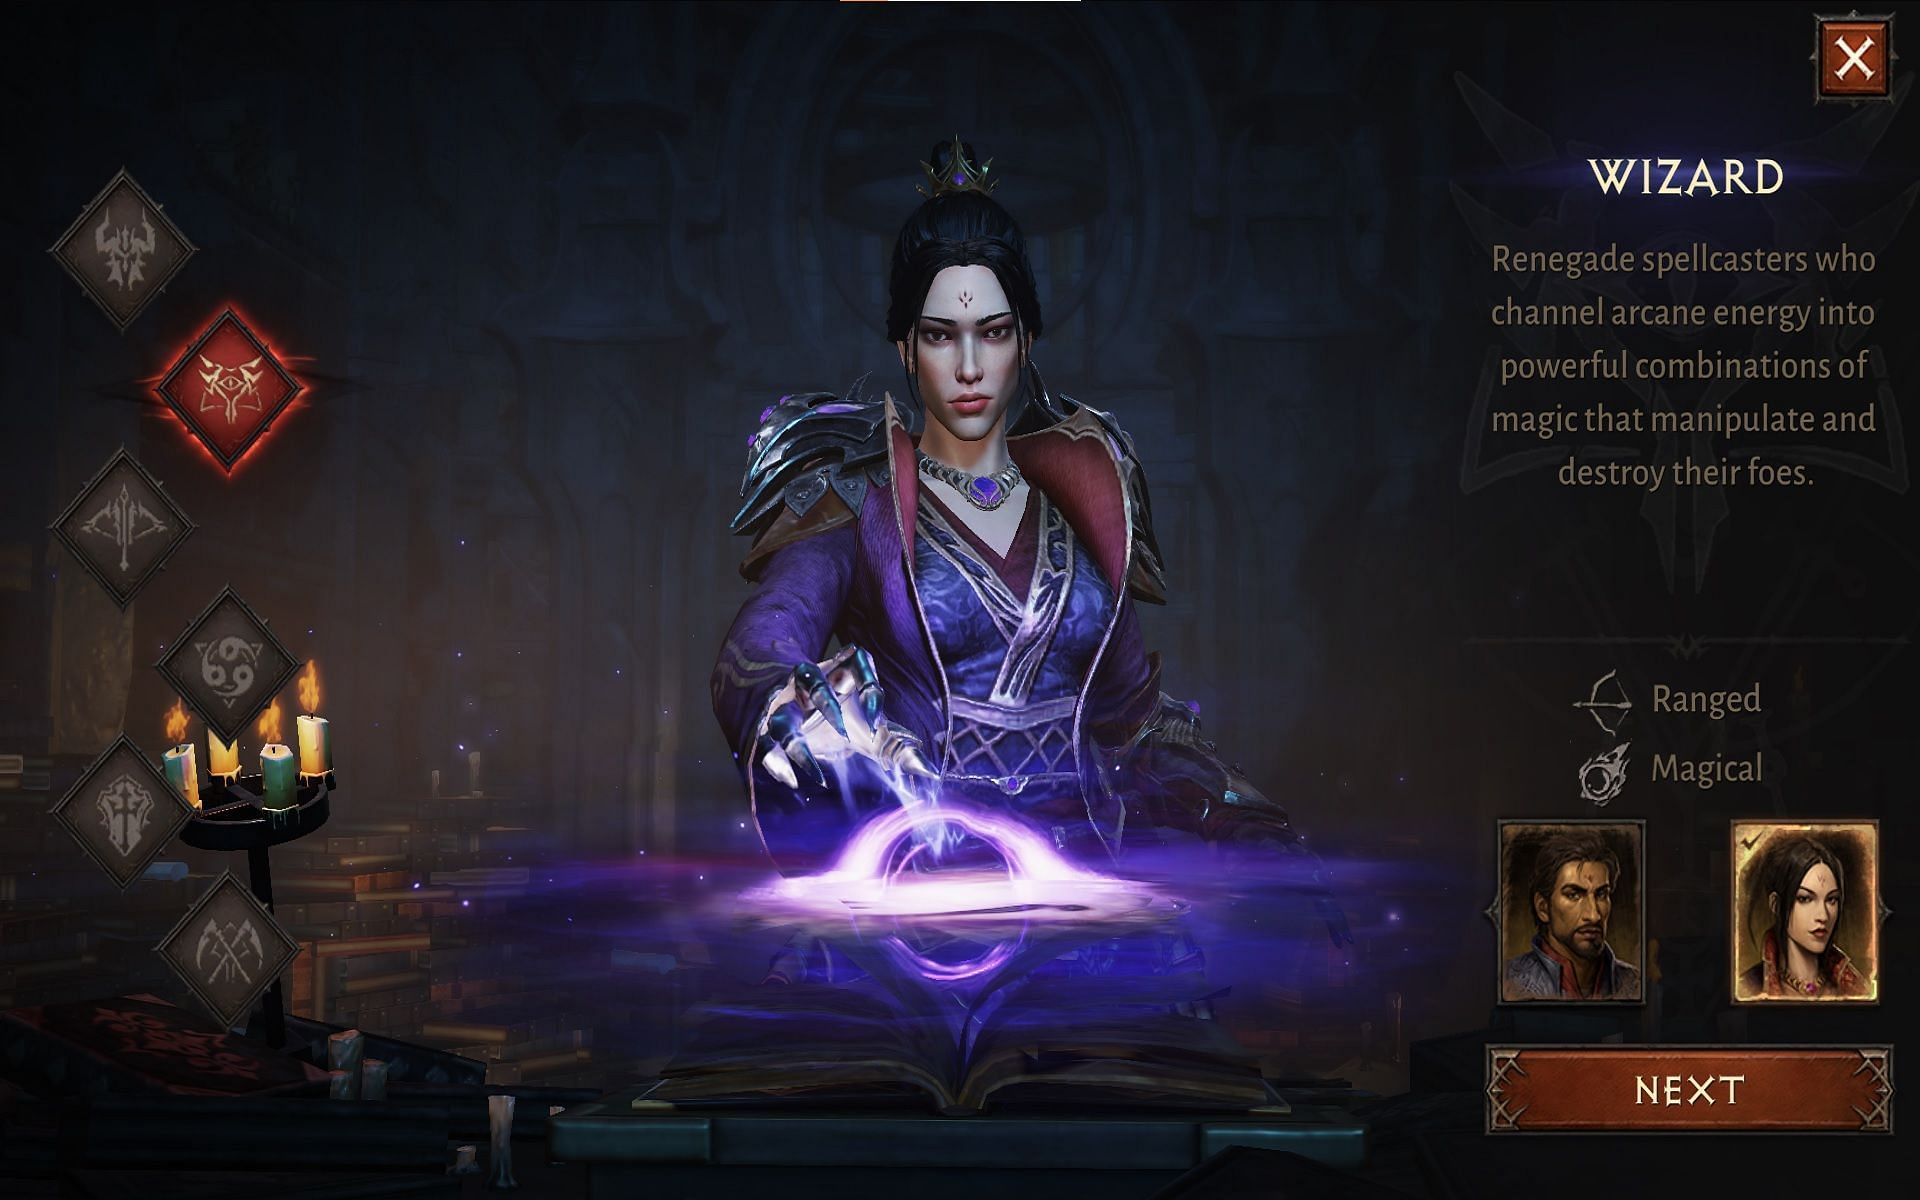 Diablo Immortal Best Class: What is the best starting, solo and